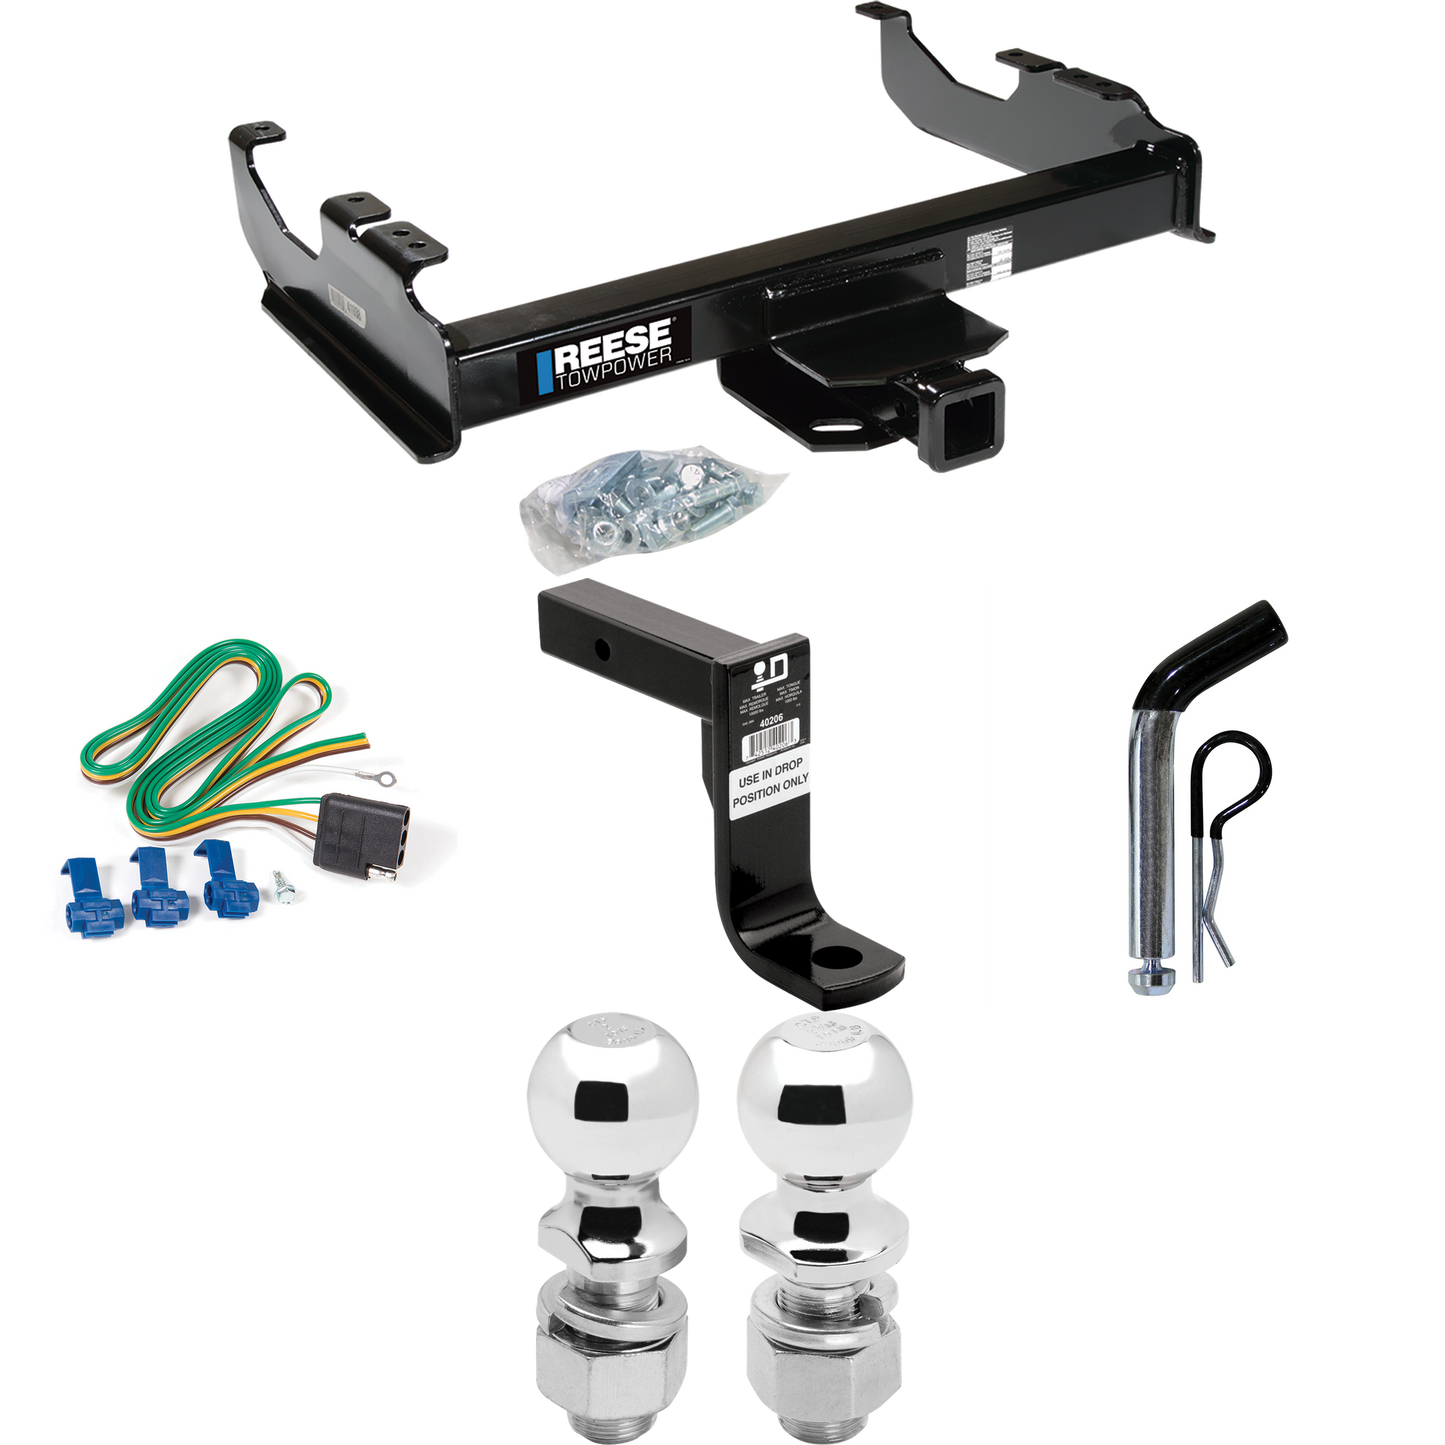 Fits 1963-1965 GMC 1000 Series Trailer Hitch Tow PKG w/ 4-Flat Wiring Harness + Ball Mount w/ 8" Drop + Pin/Clip + 2" Ball + 2-5/16" Ball By Reese Towpower